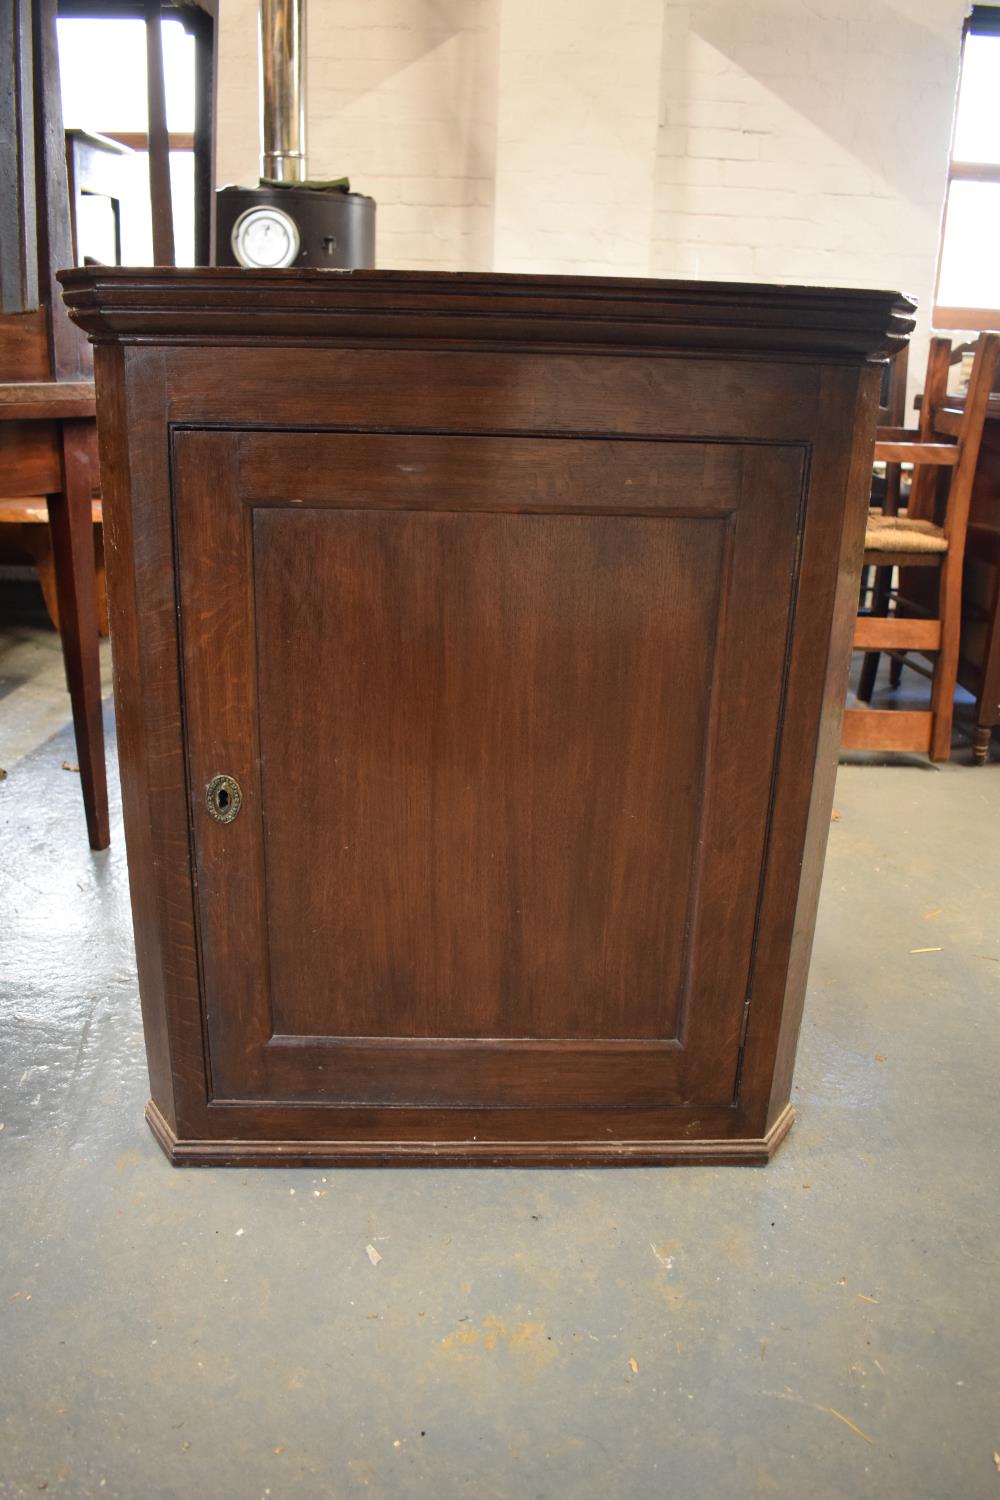 Victorian oak corner cupboard. With signs of wear and tear and use. 75 x 40 x 88cm